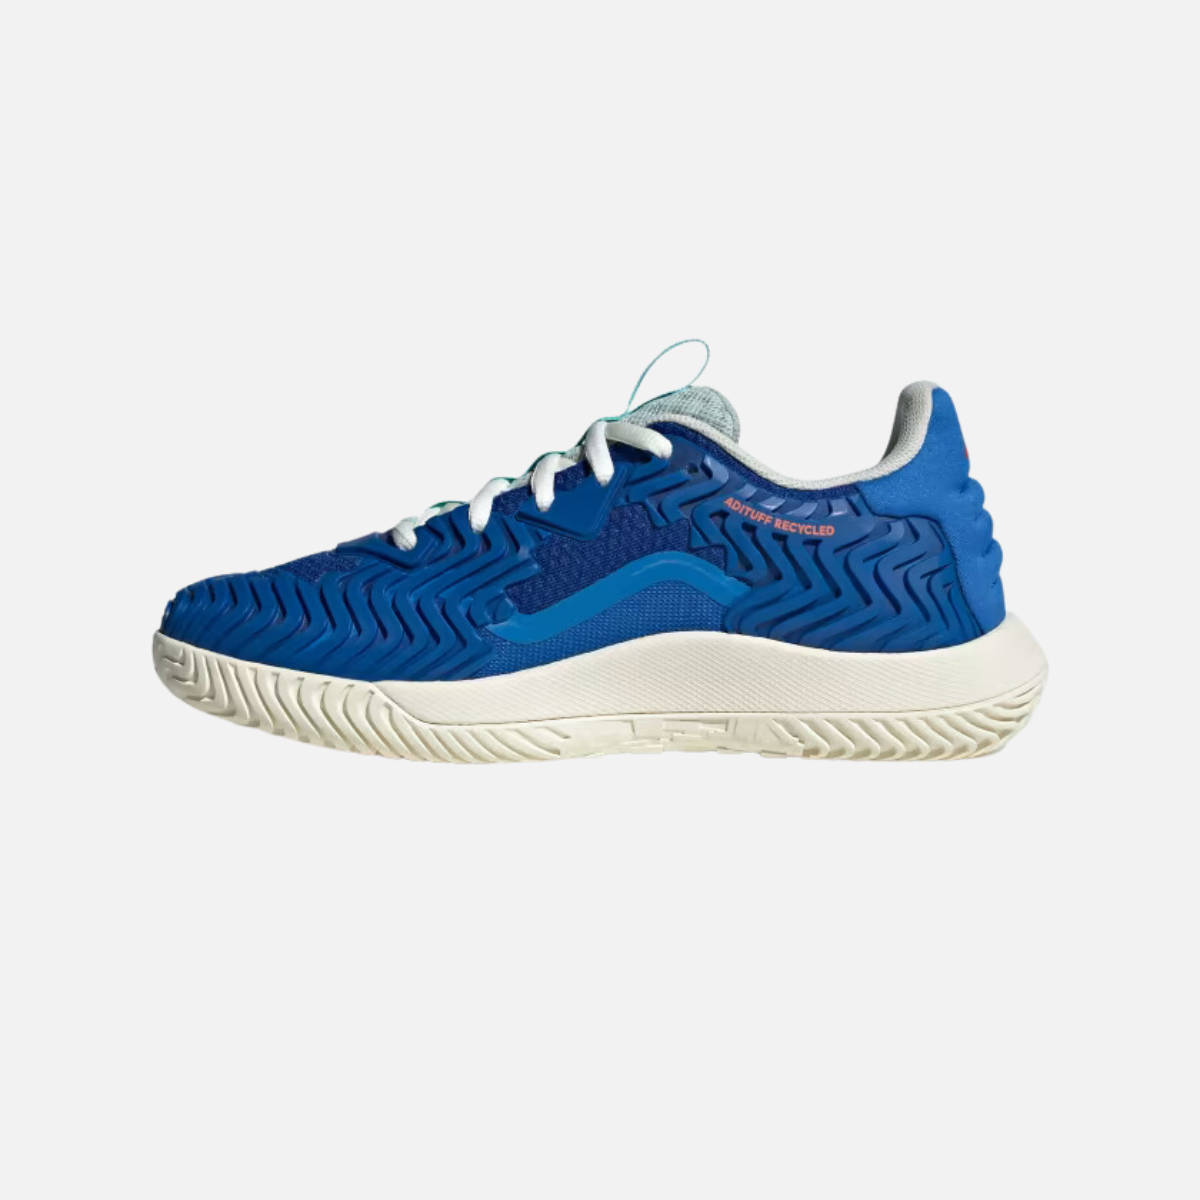 Adidas Solematch Control Men's Tennis Shoes -Royal Blue/Off White/Bright Royal